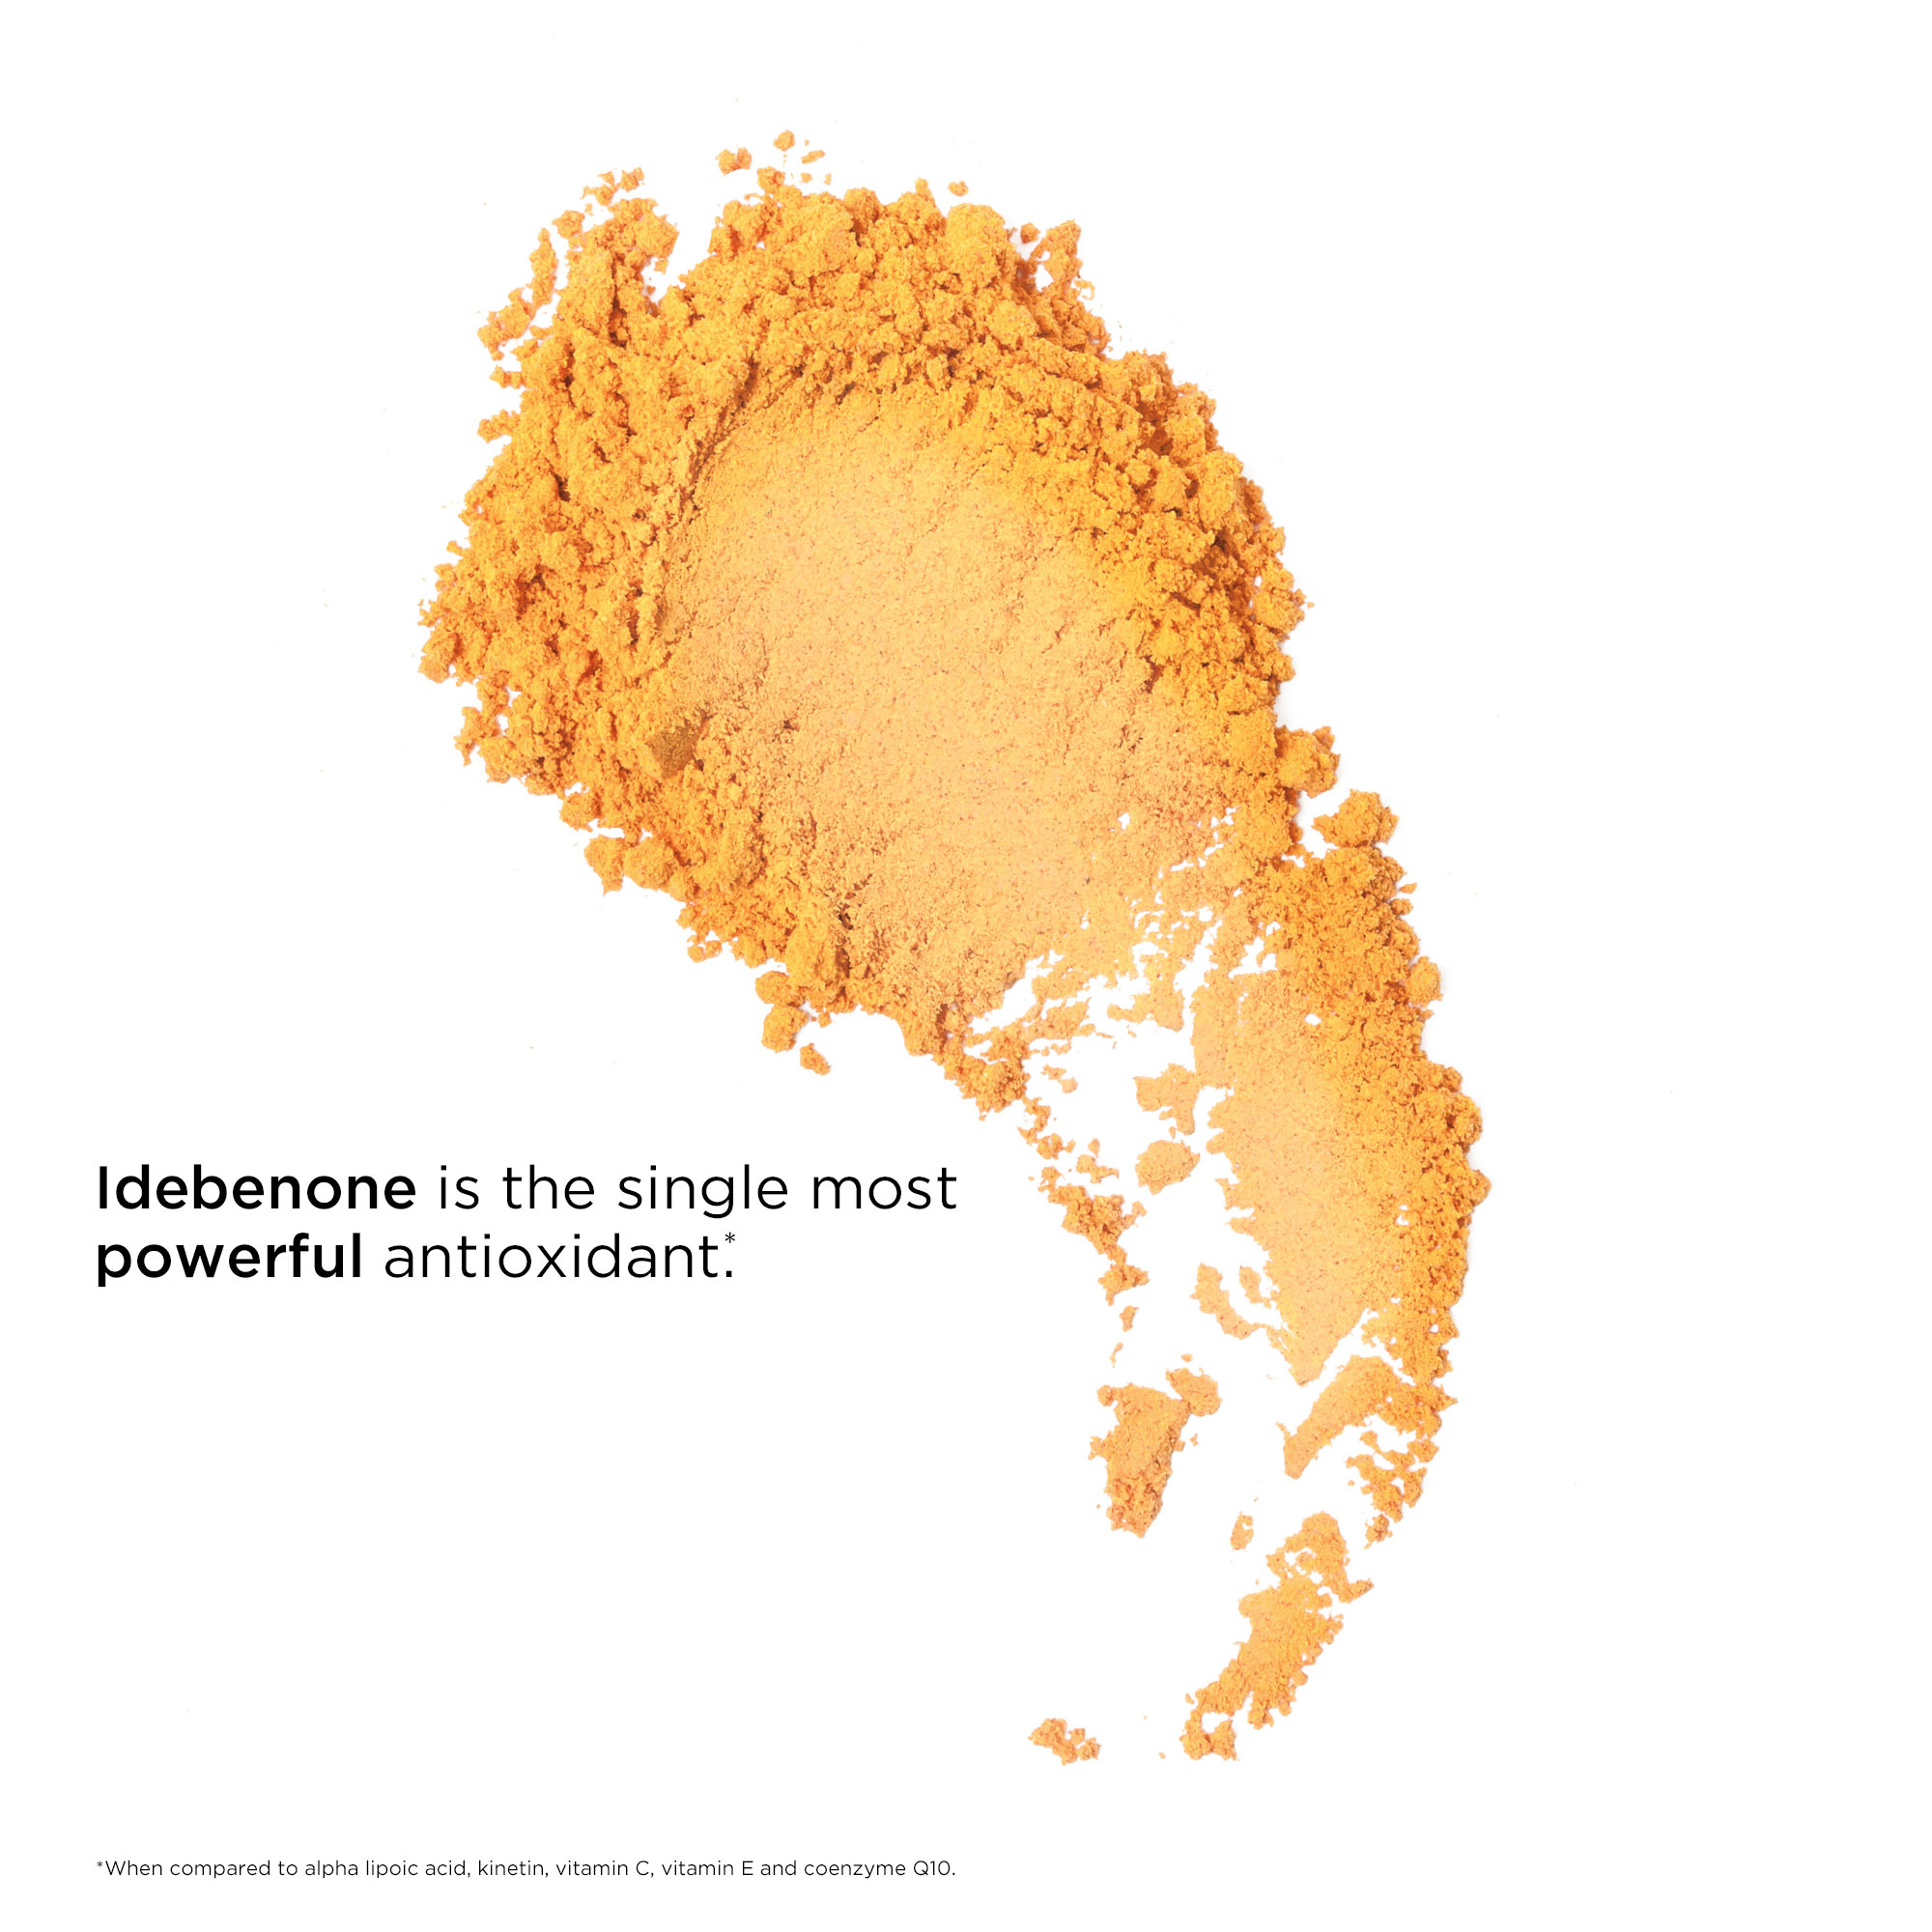 Idebenone is the single most powerful antioxident when compared to alpha lipoic acid, kinetin. Vitamin c, vitamin e, and coenzyme Q10.